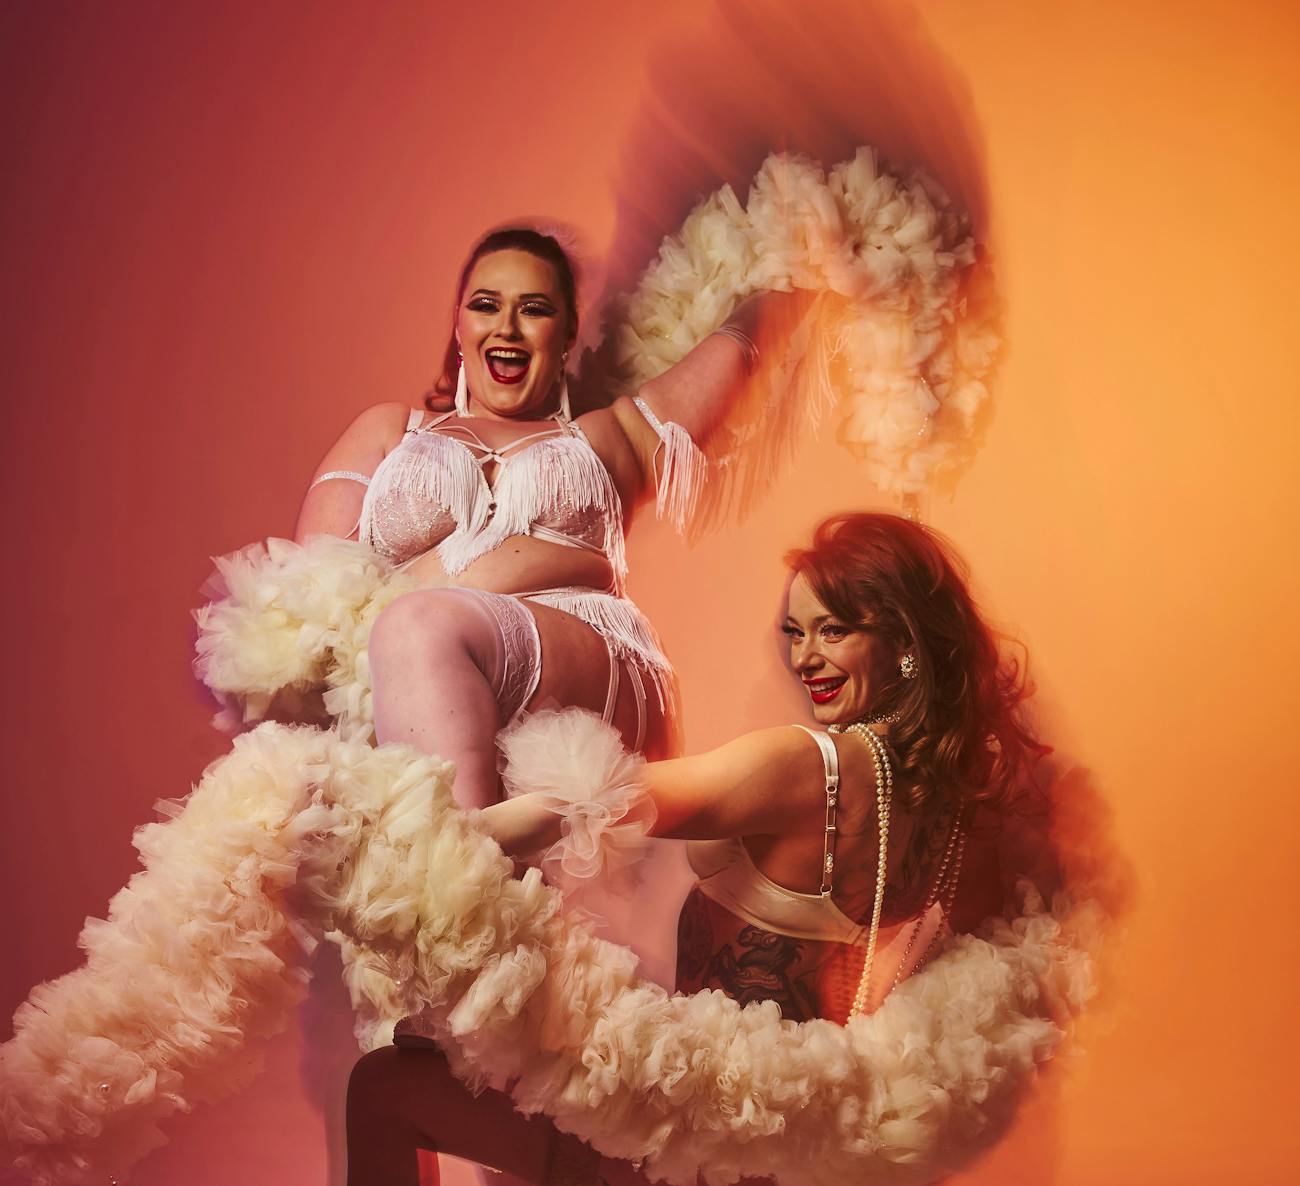 A pair of burlesque beauties pose before an orange background. They are both dark haired, light skinned and wearing white burlesque outfits with pearls, beads and fringe. They are both holding white boas which they wrap around themselves in a playful manner.